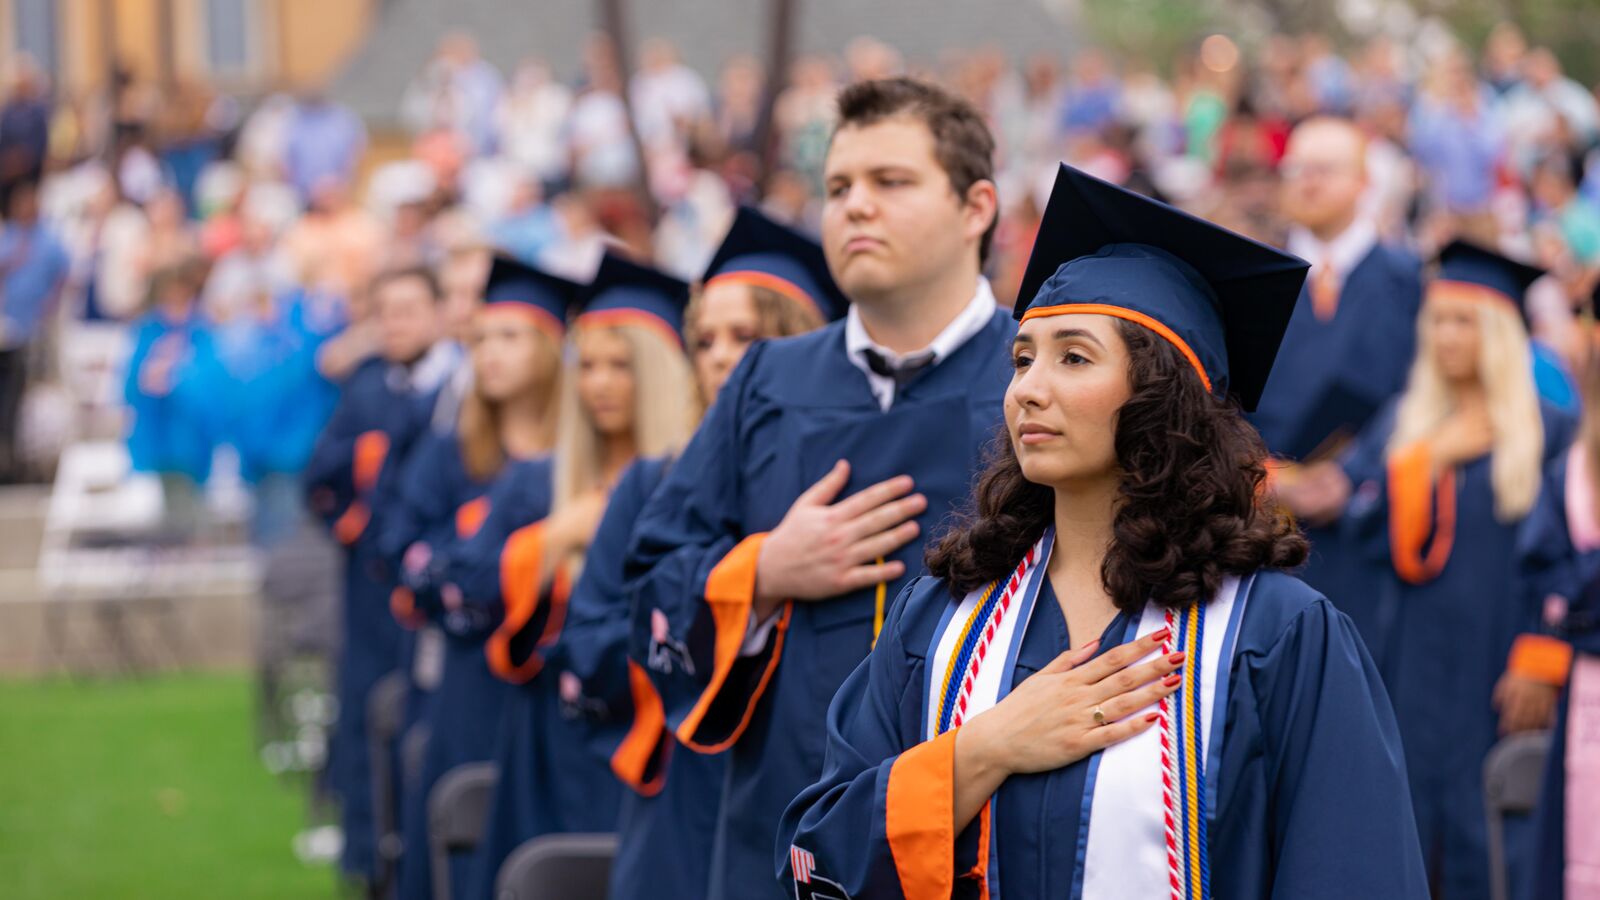 PhD in Clinical Psychology students during UT Tyler's Spring Commencement Ceremony